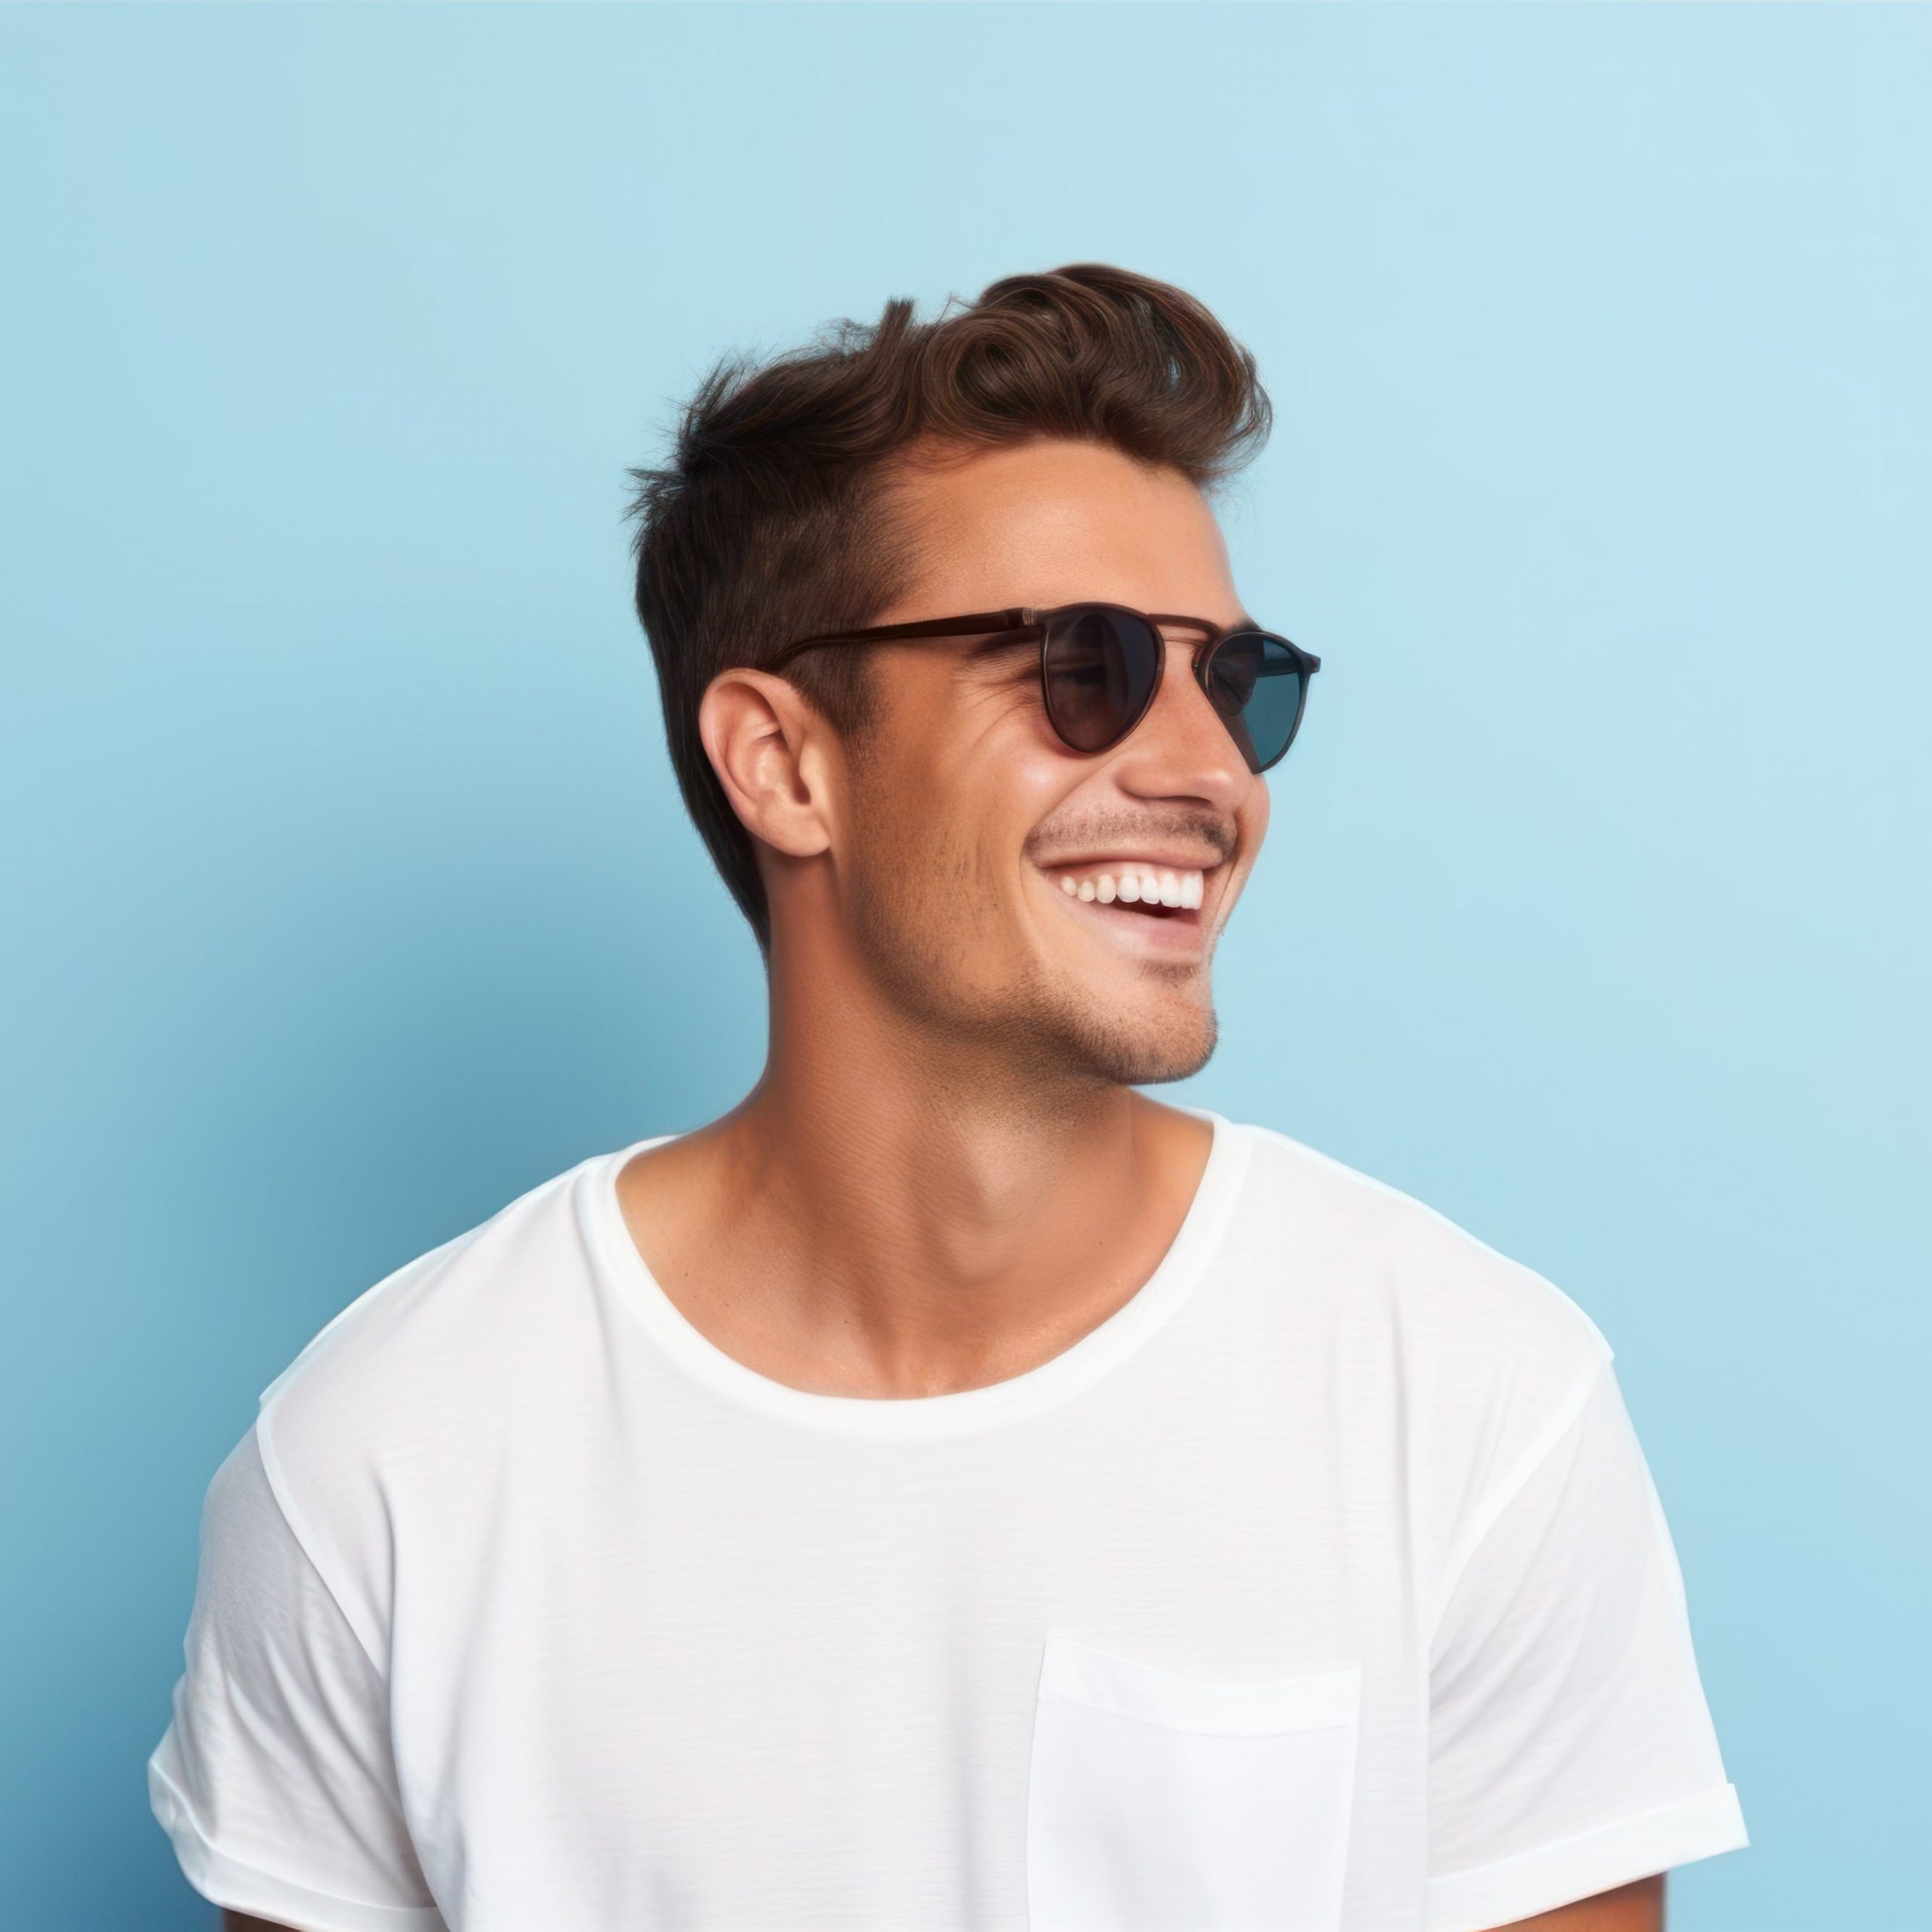 Guy smiling in casual white t shirt